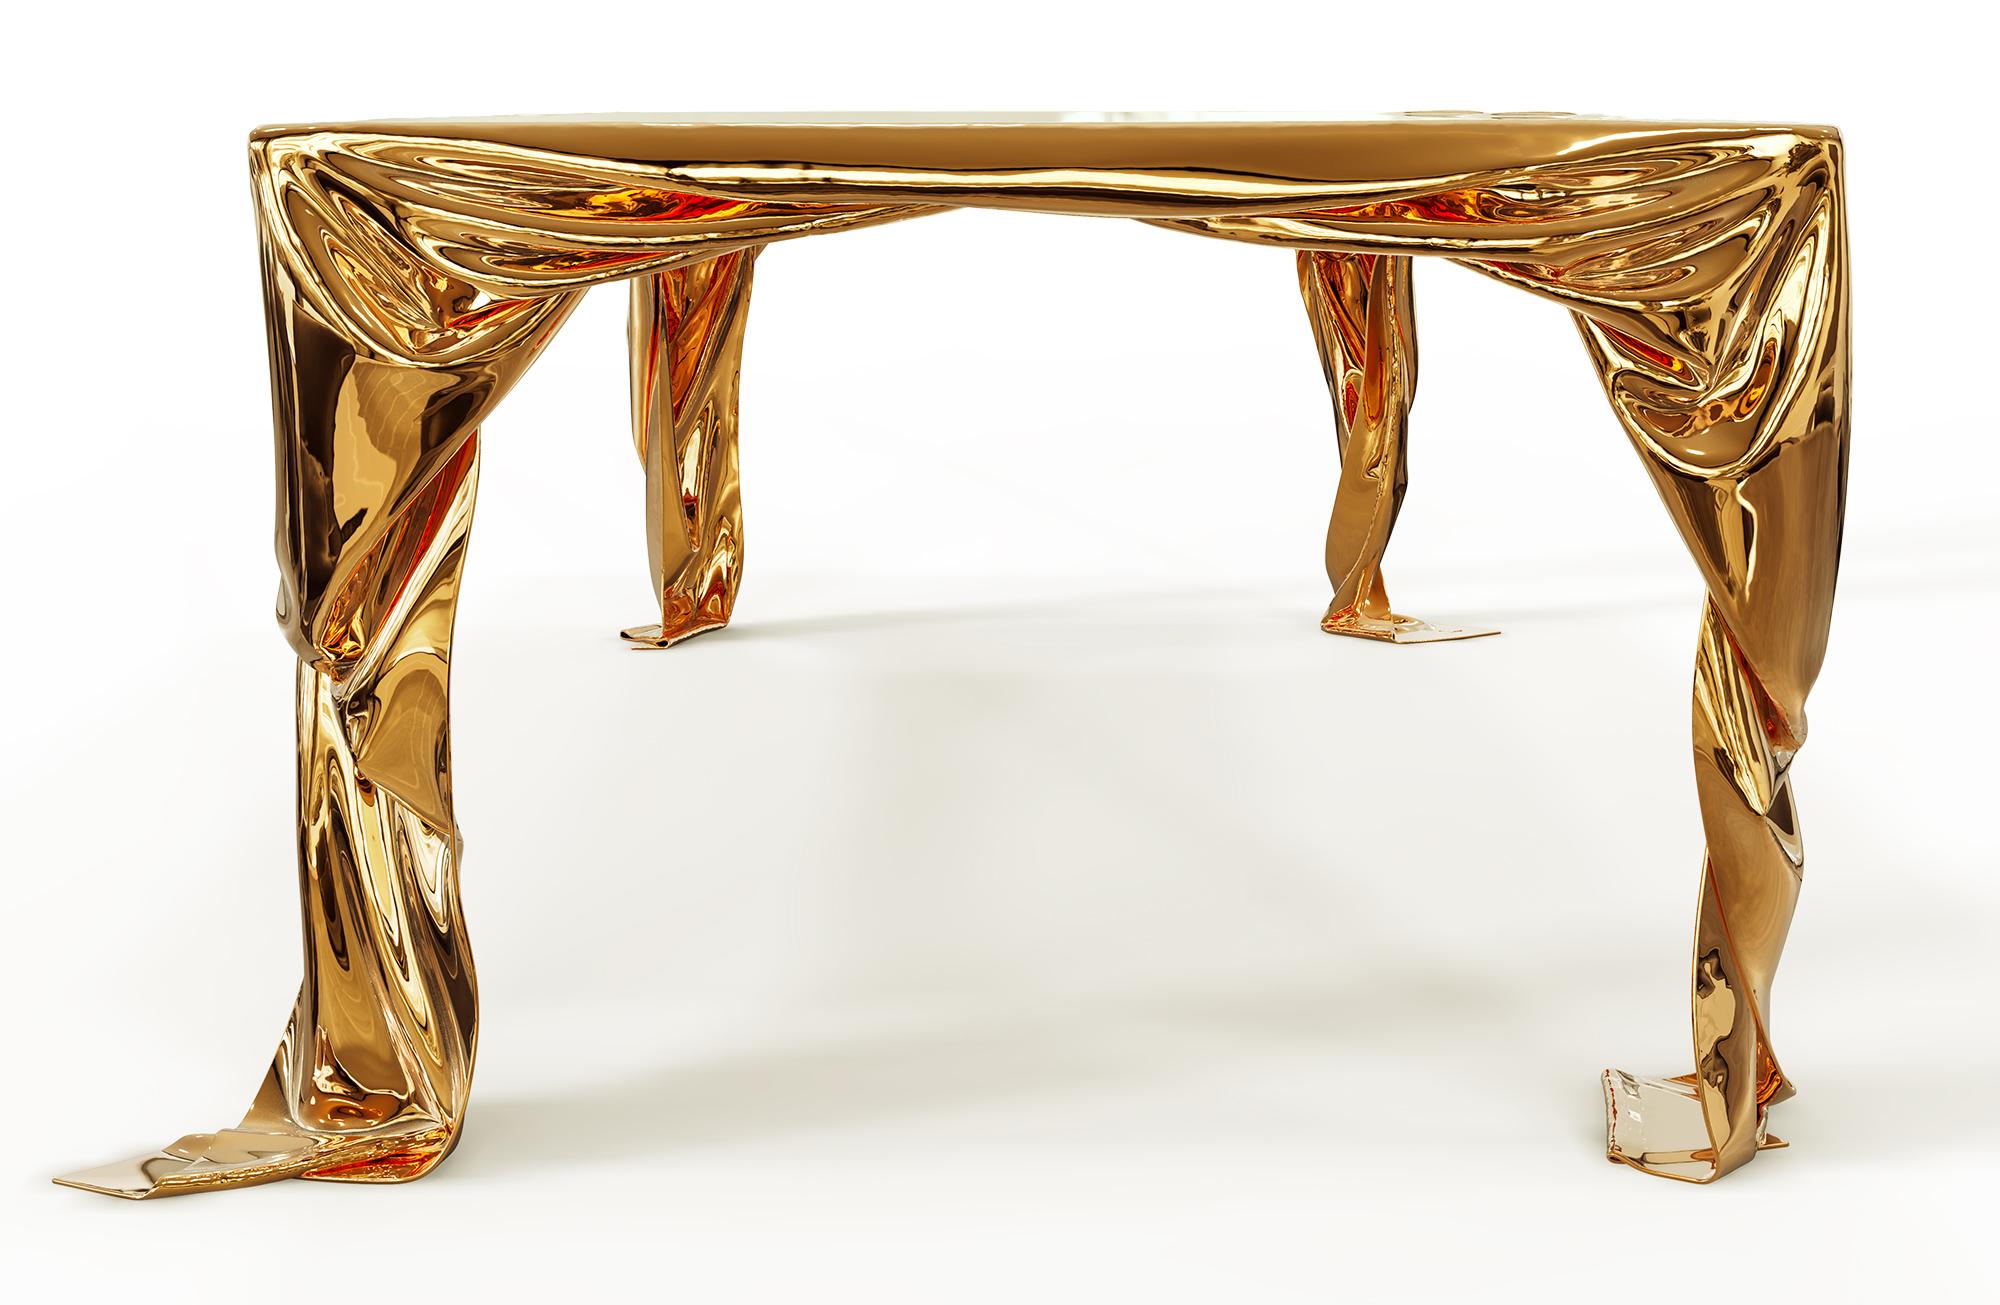 Contemporary Levitaz Cast Bronze Dining Table For Sale